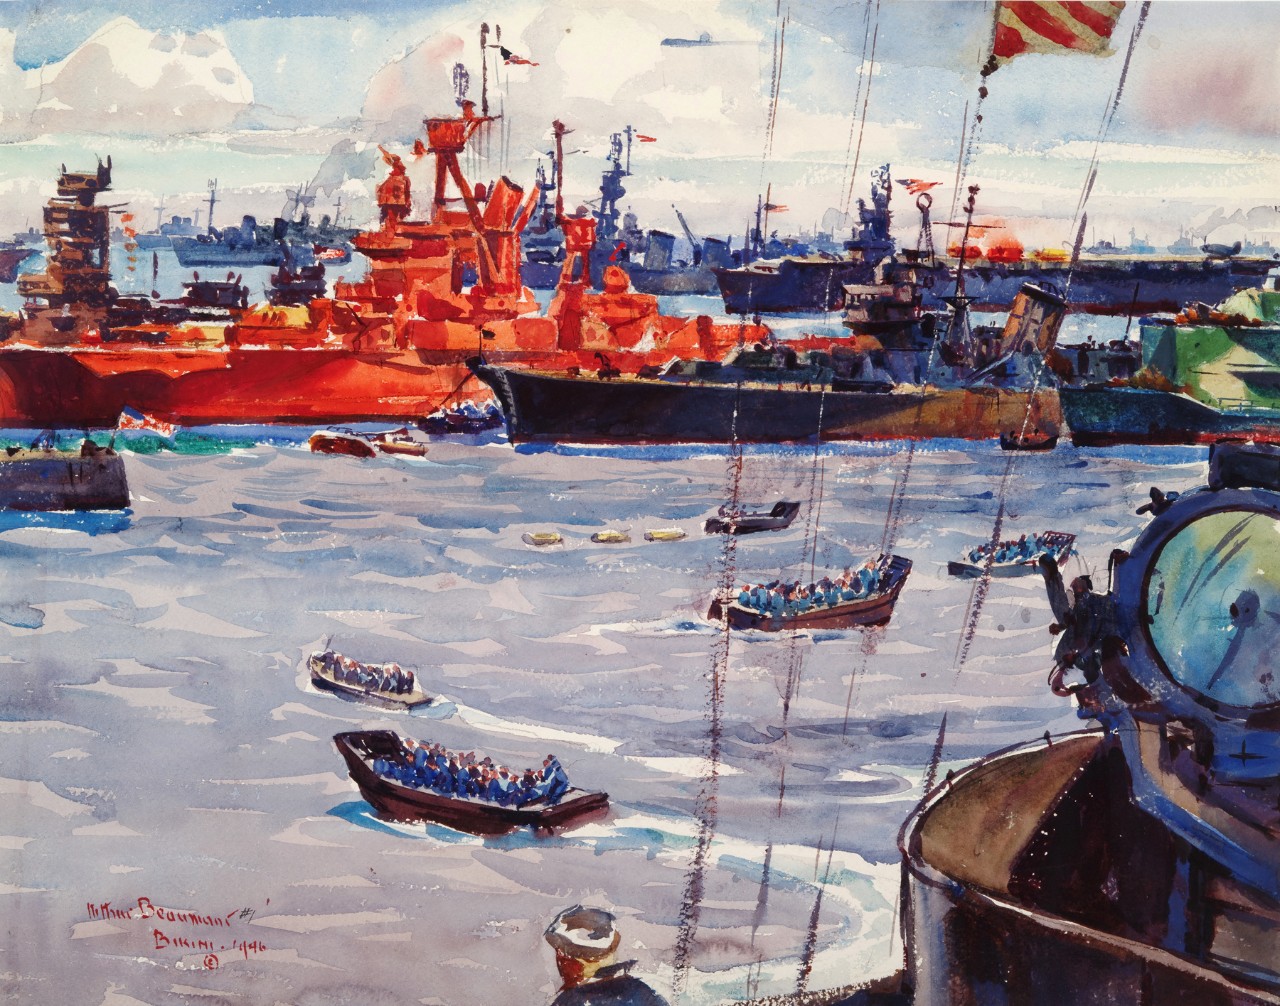 A battleship painted orange is in the center of boats and ships 